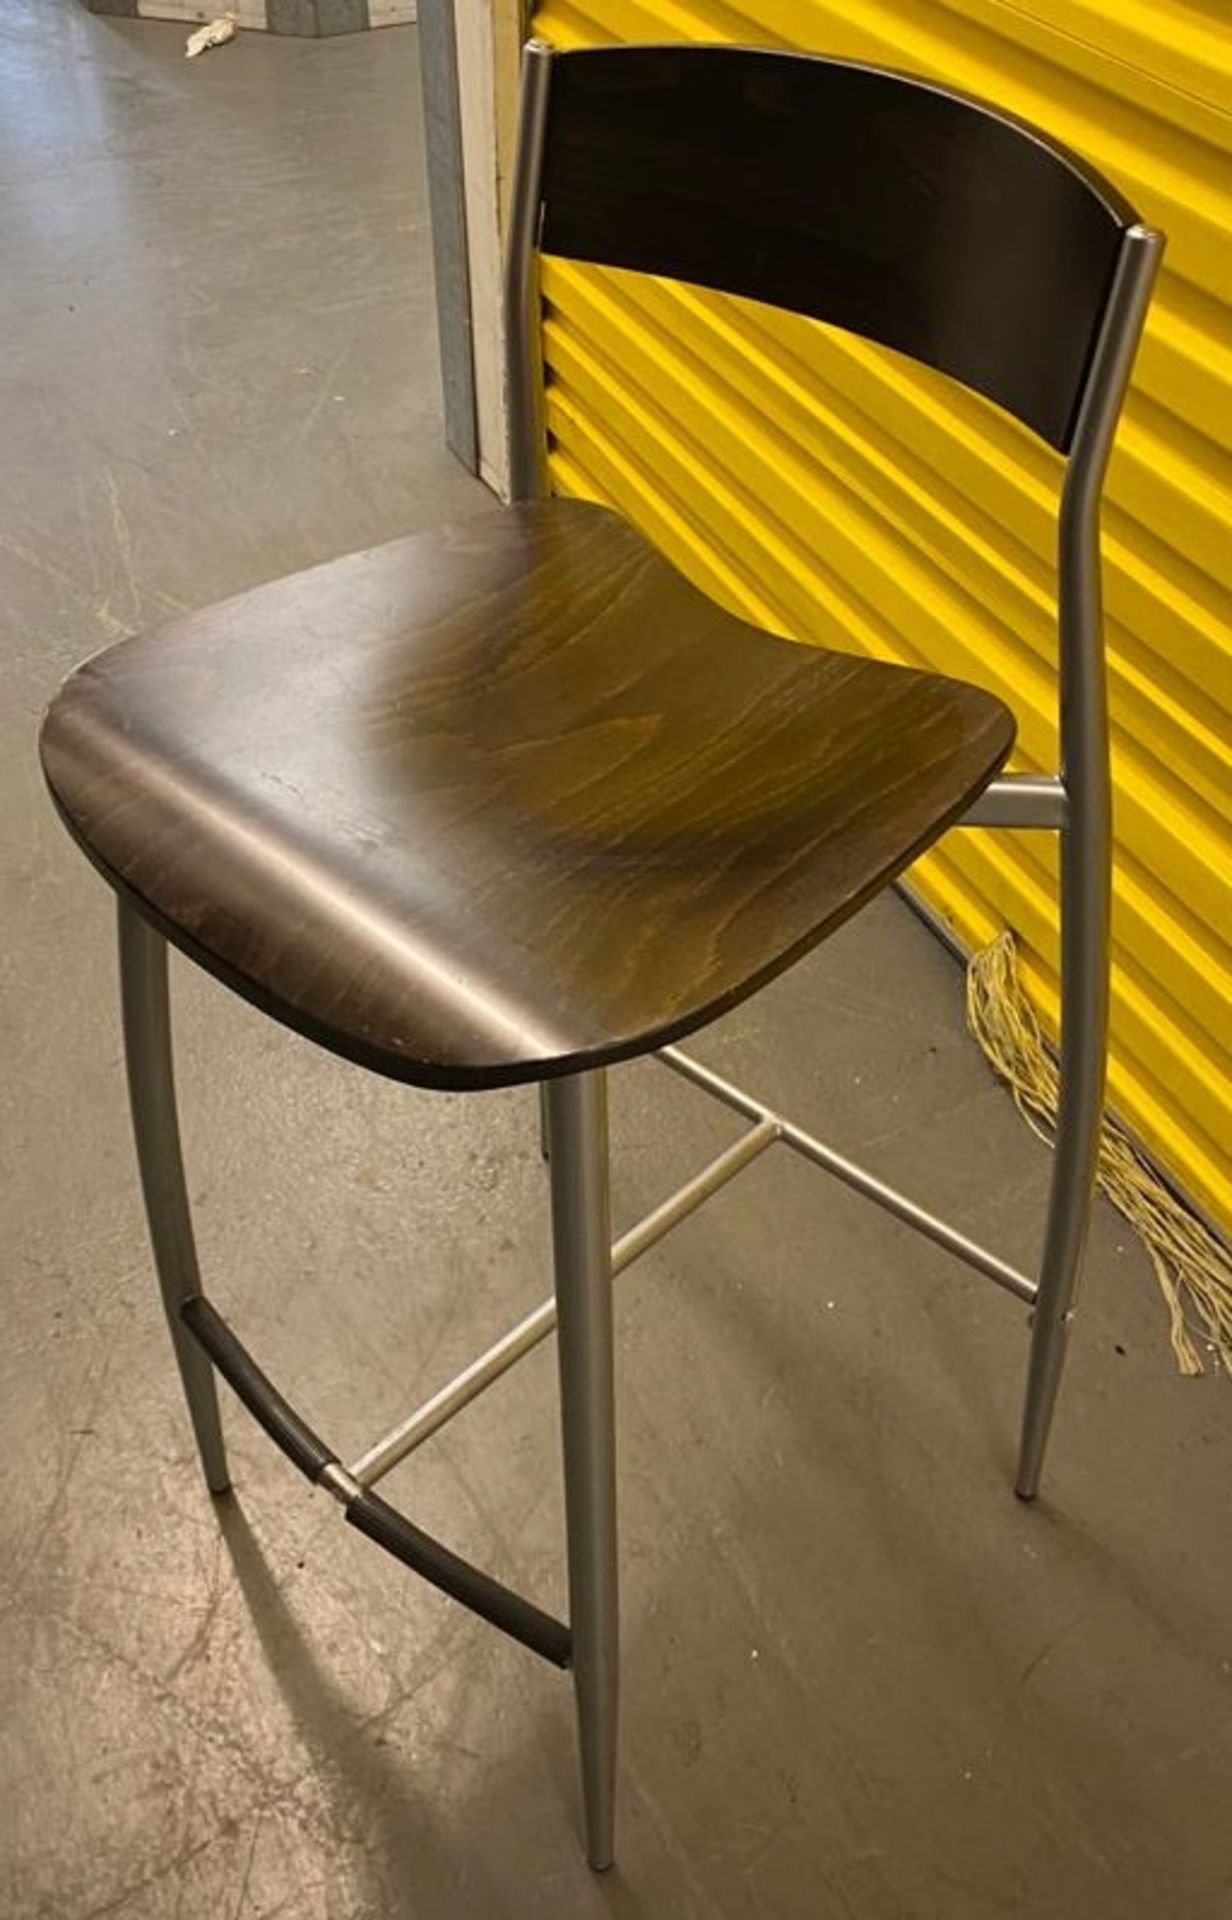 4 x Altek Bar Stools - Made in Italy - Supplied in Dark Wood - CL667 - Location: Brighton, Sussex, - Image 2 of 6